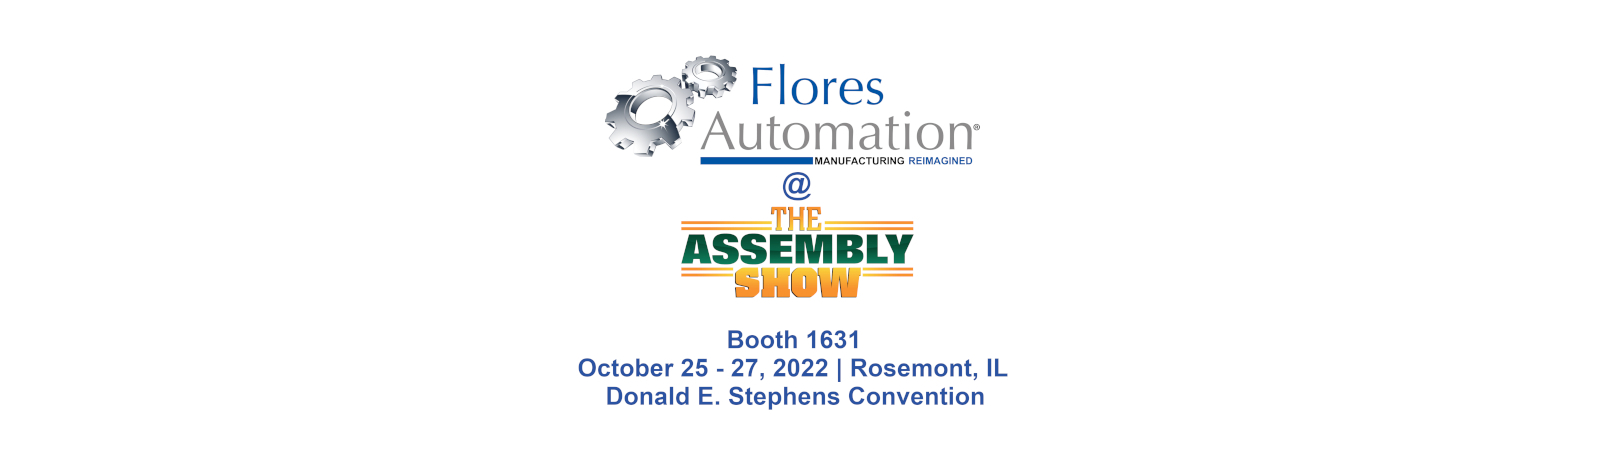 Flores Automation is exhibiting at the Assembly Show